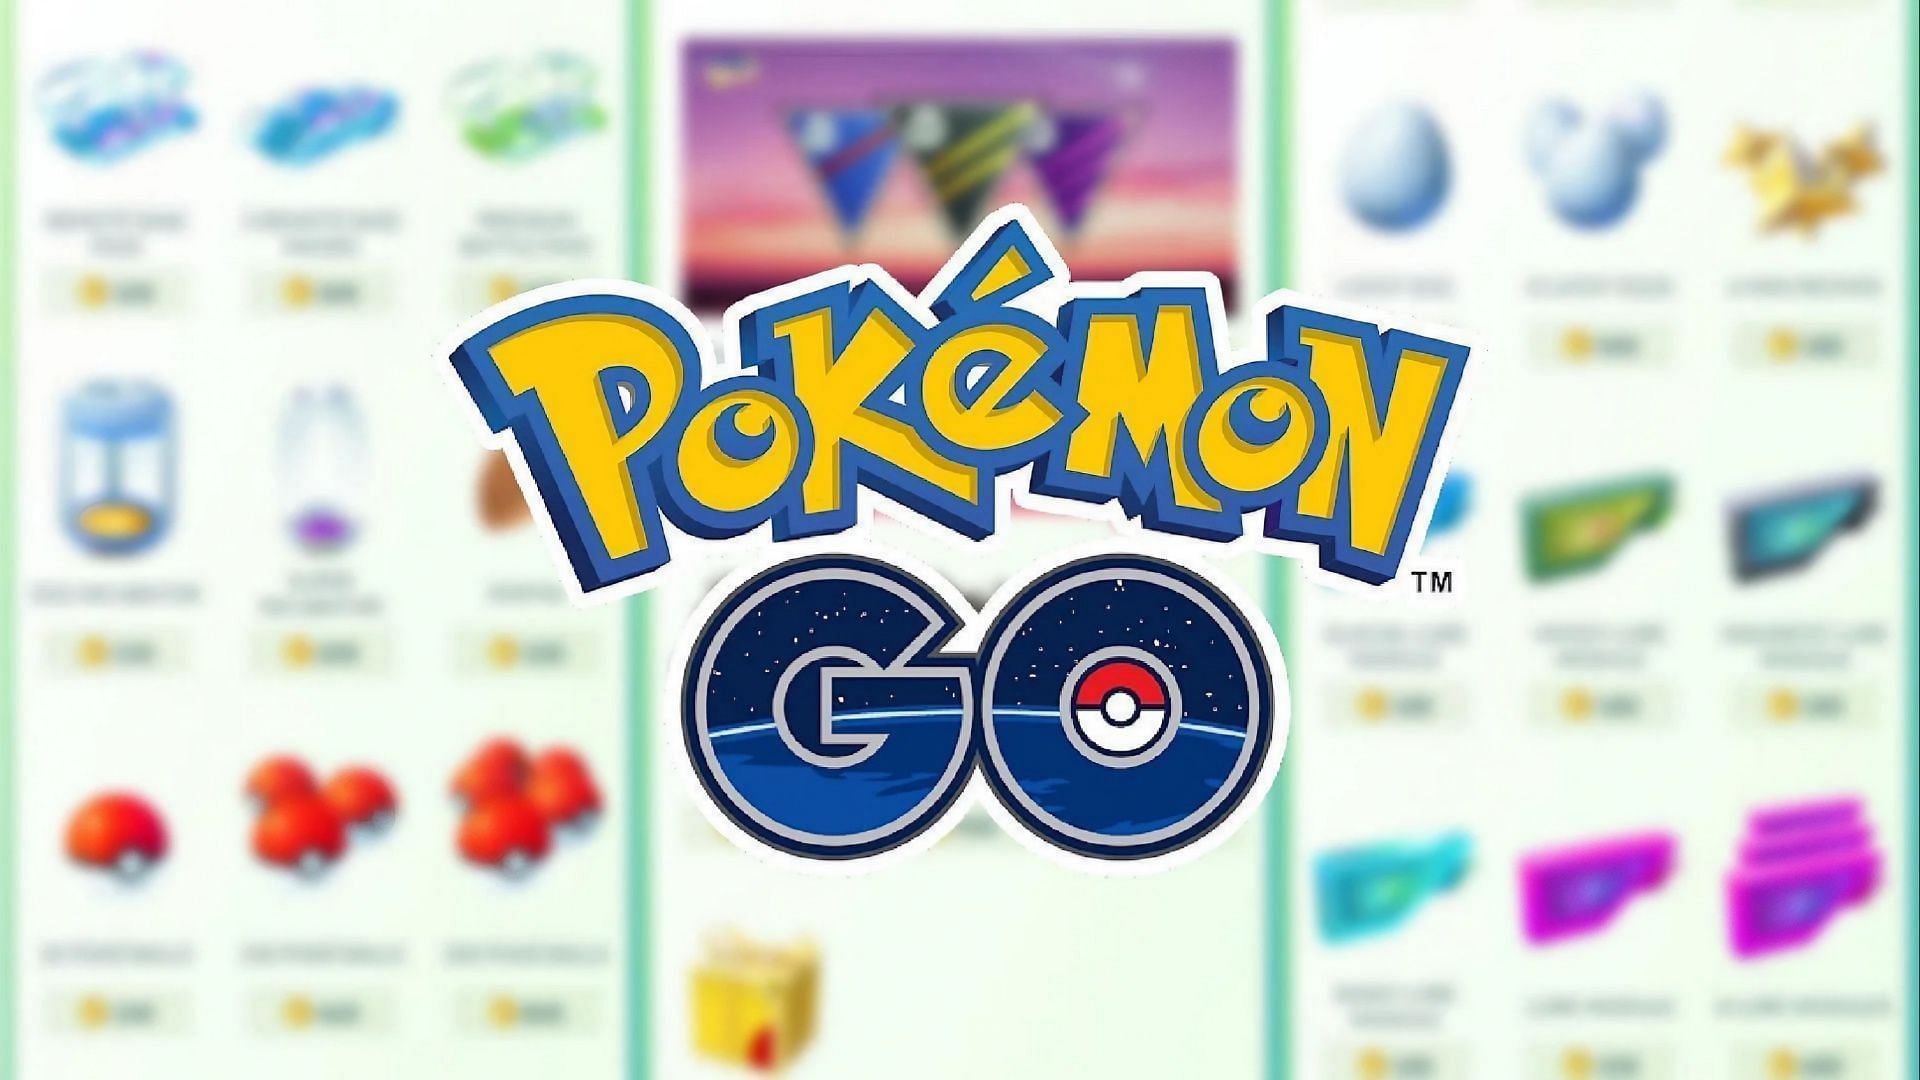 Pokemon GO shop: Prices, boxes, items, and offerings